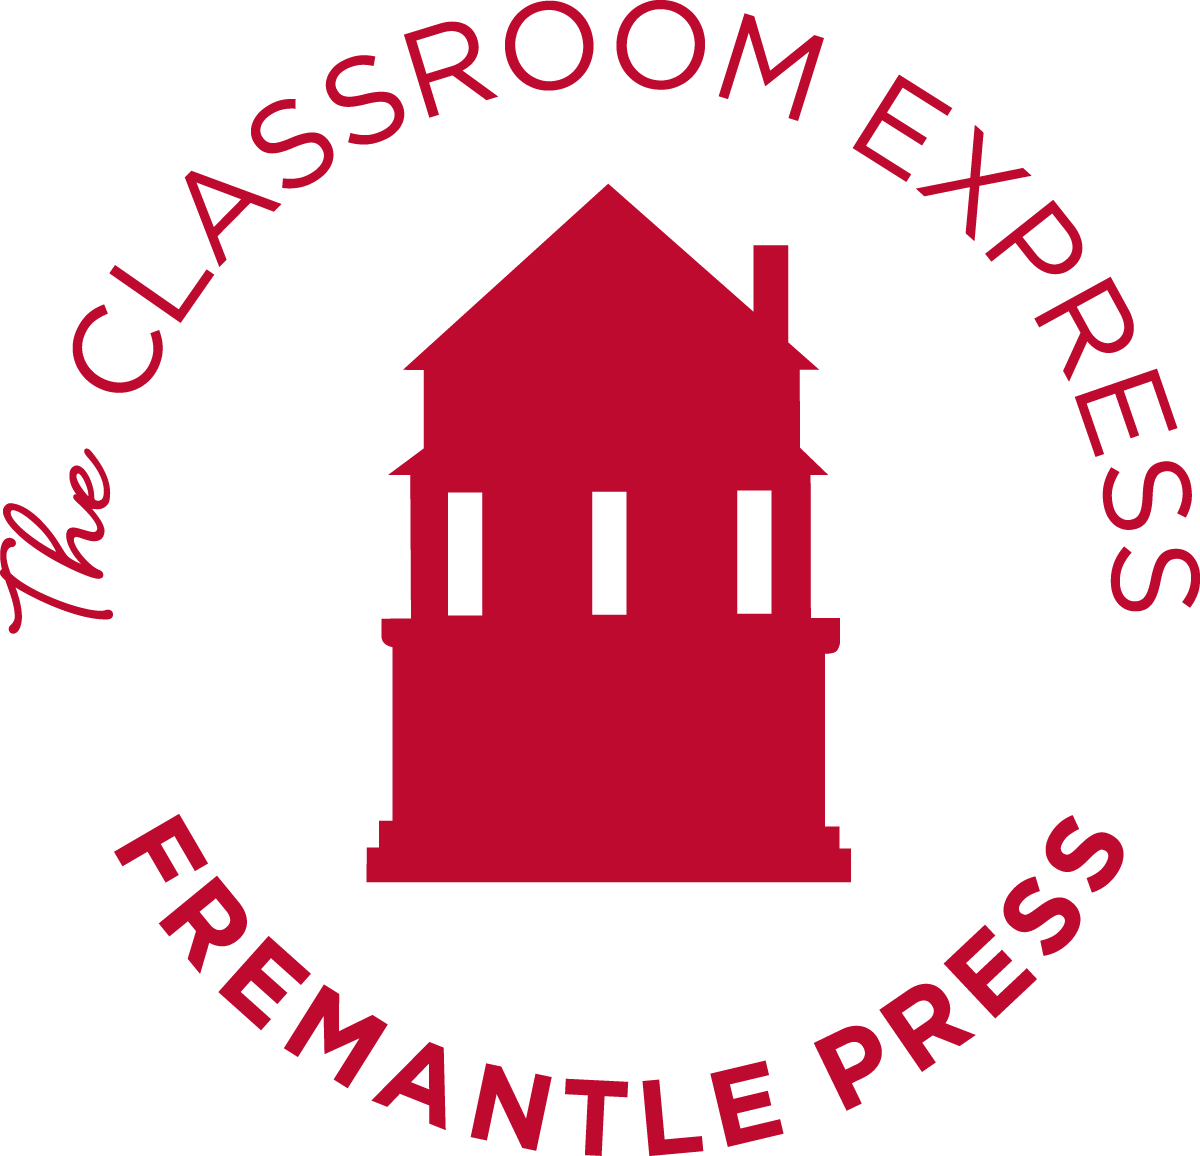 'The Classroom Express' (Education news delivered to your inbox once a term)